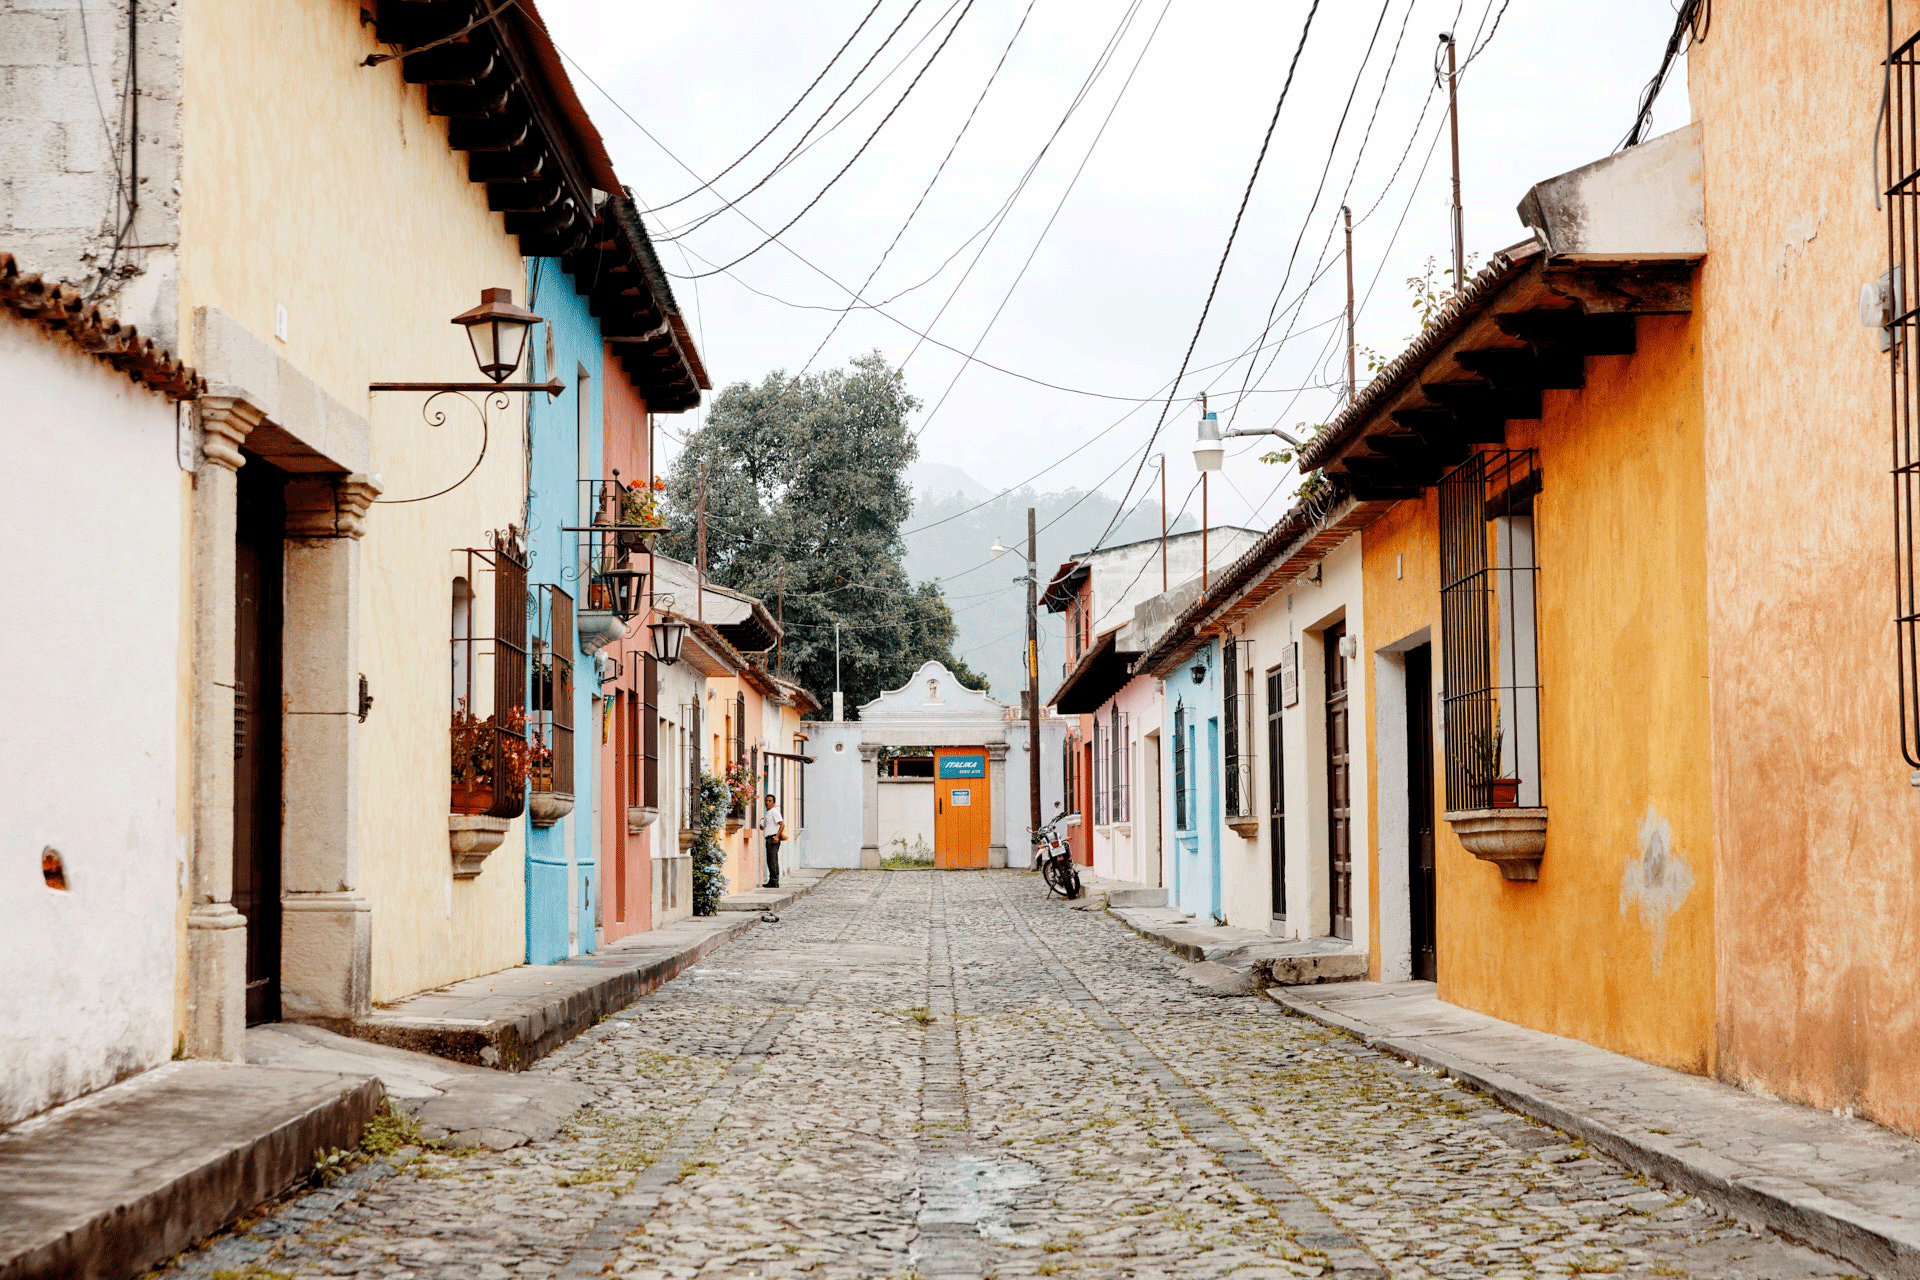 A cobblestone street with brighly colored houses on either side and telephone wires hanging overhead.